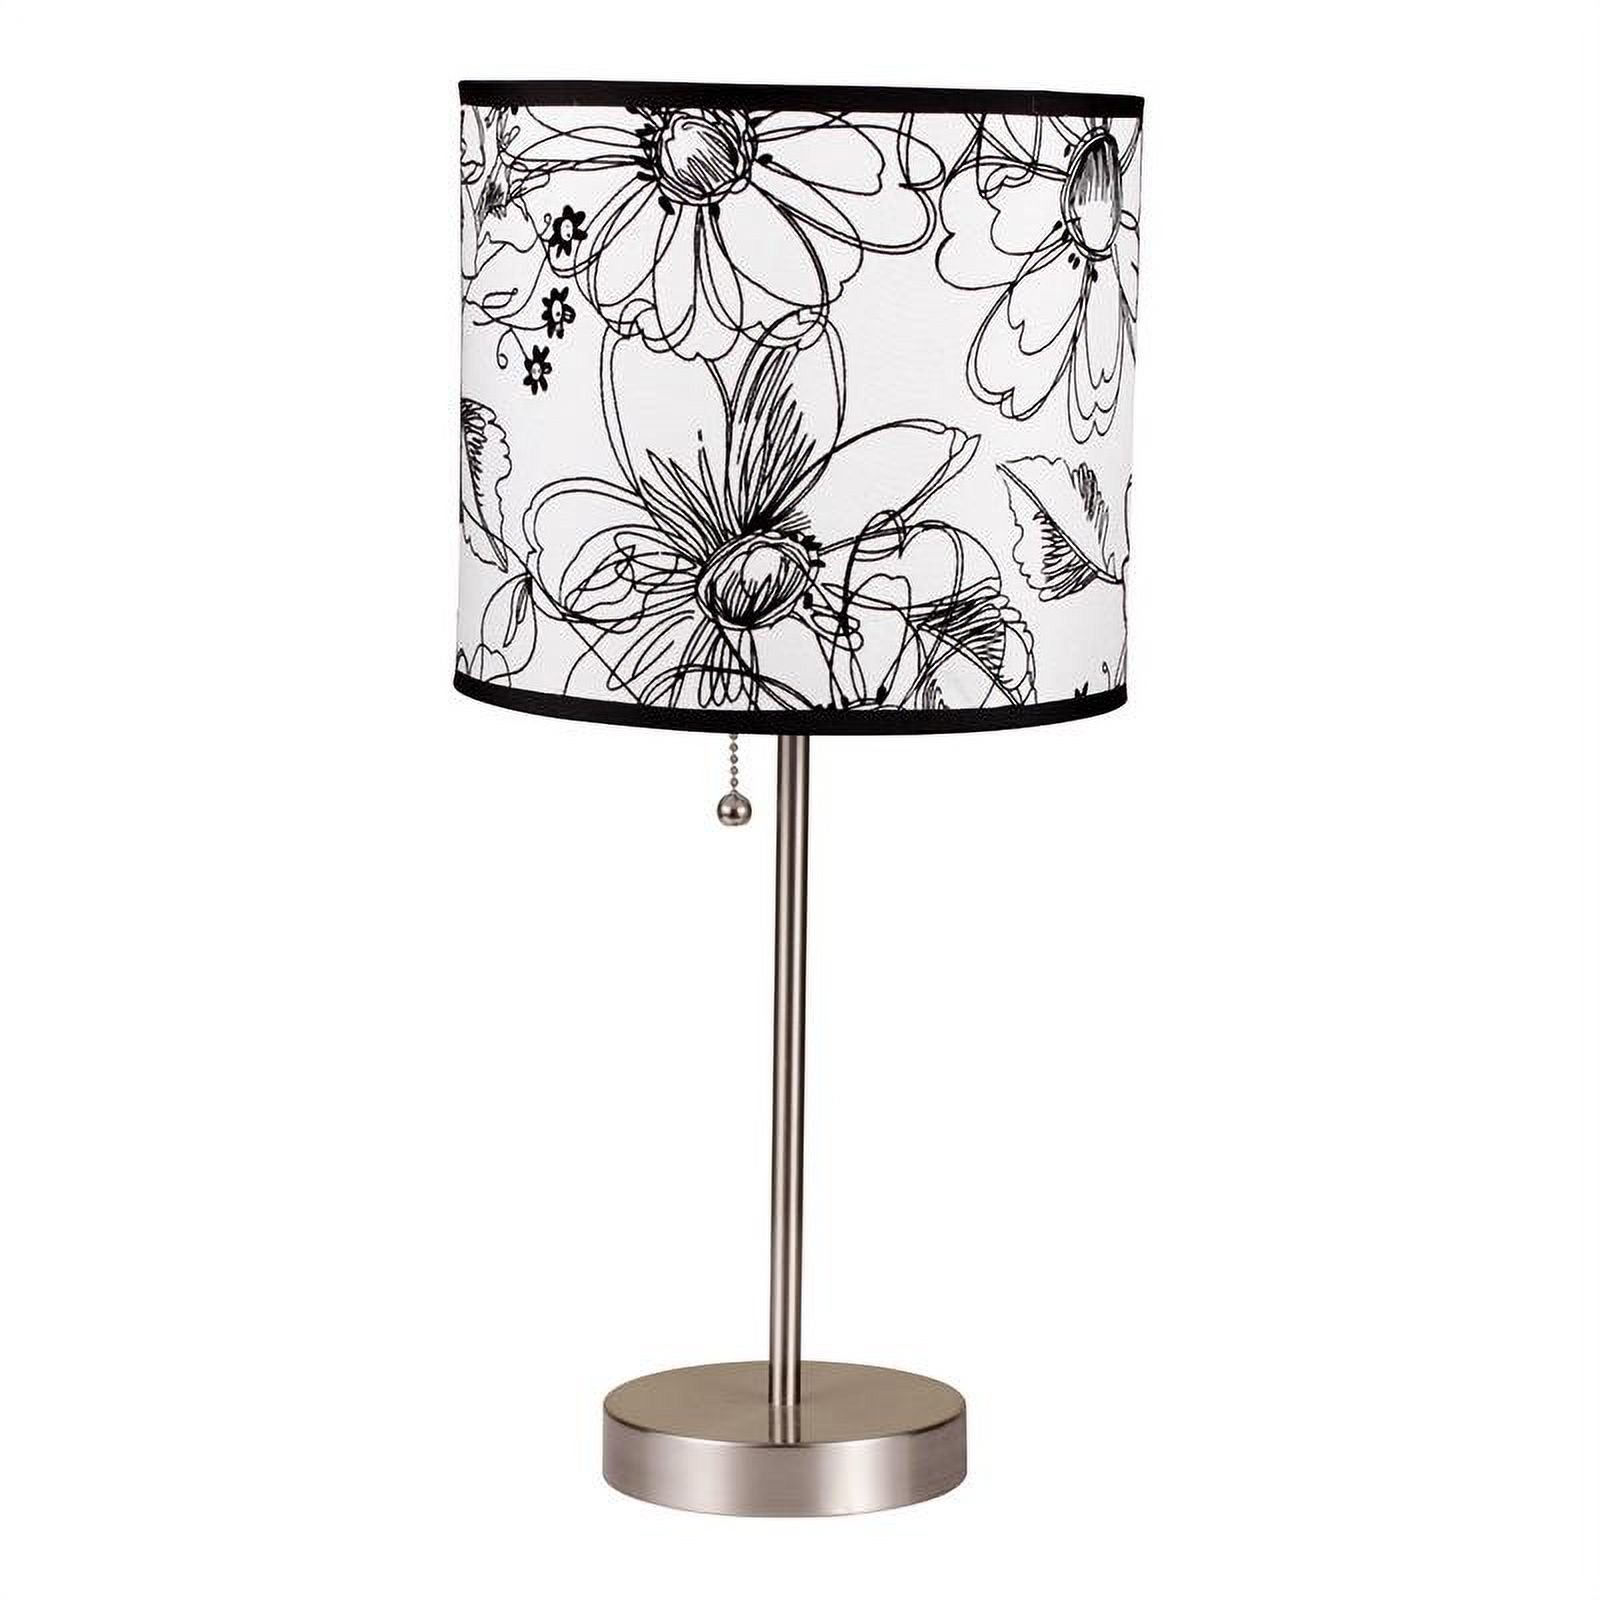 ORE International Floral Print 2-Piece Table Lamp - image 2 of 2